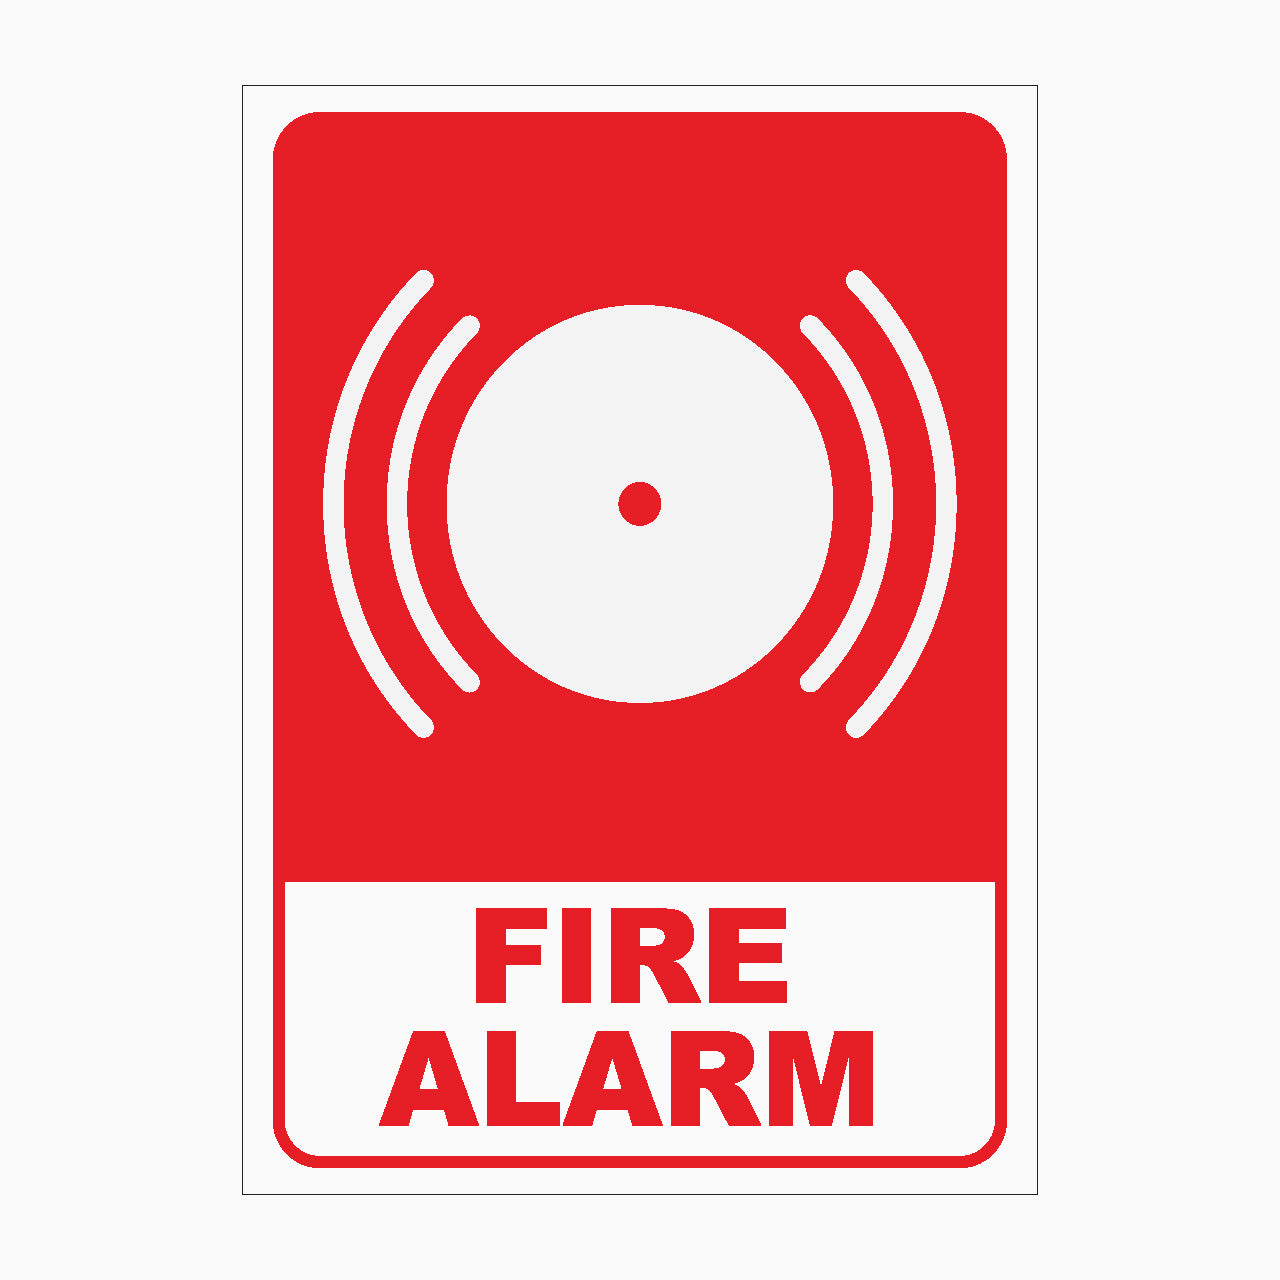 FIRE ALARM SIGN - FIRE SAFETY SIGNS IN AUSTRALIA - ONLINE SHOP